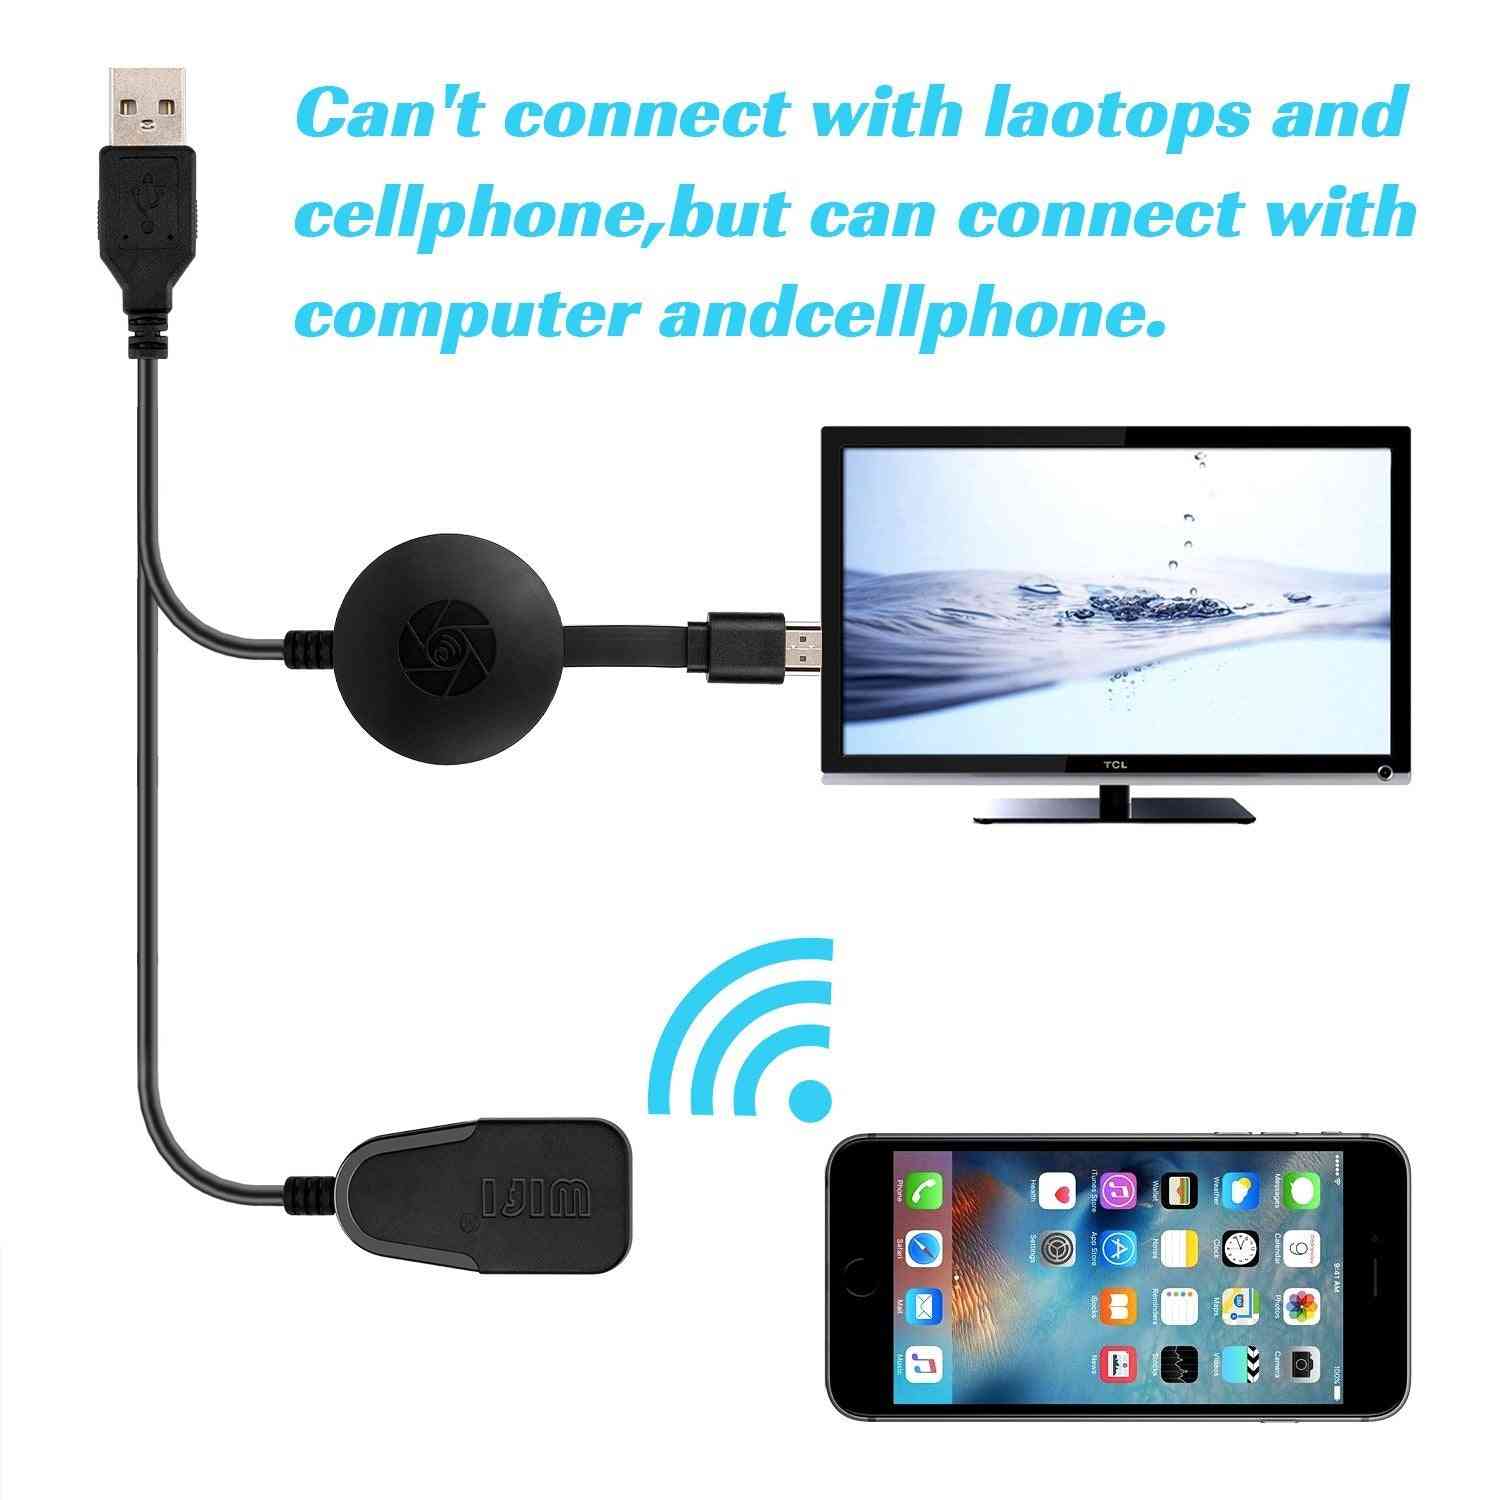 Wireless Display Dongle, Wifi Portable Display Receiver 1080p Hdmi Miracast Dongle For Ios Iphone Ipad/mac/android Smartphones (black)